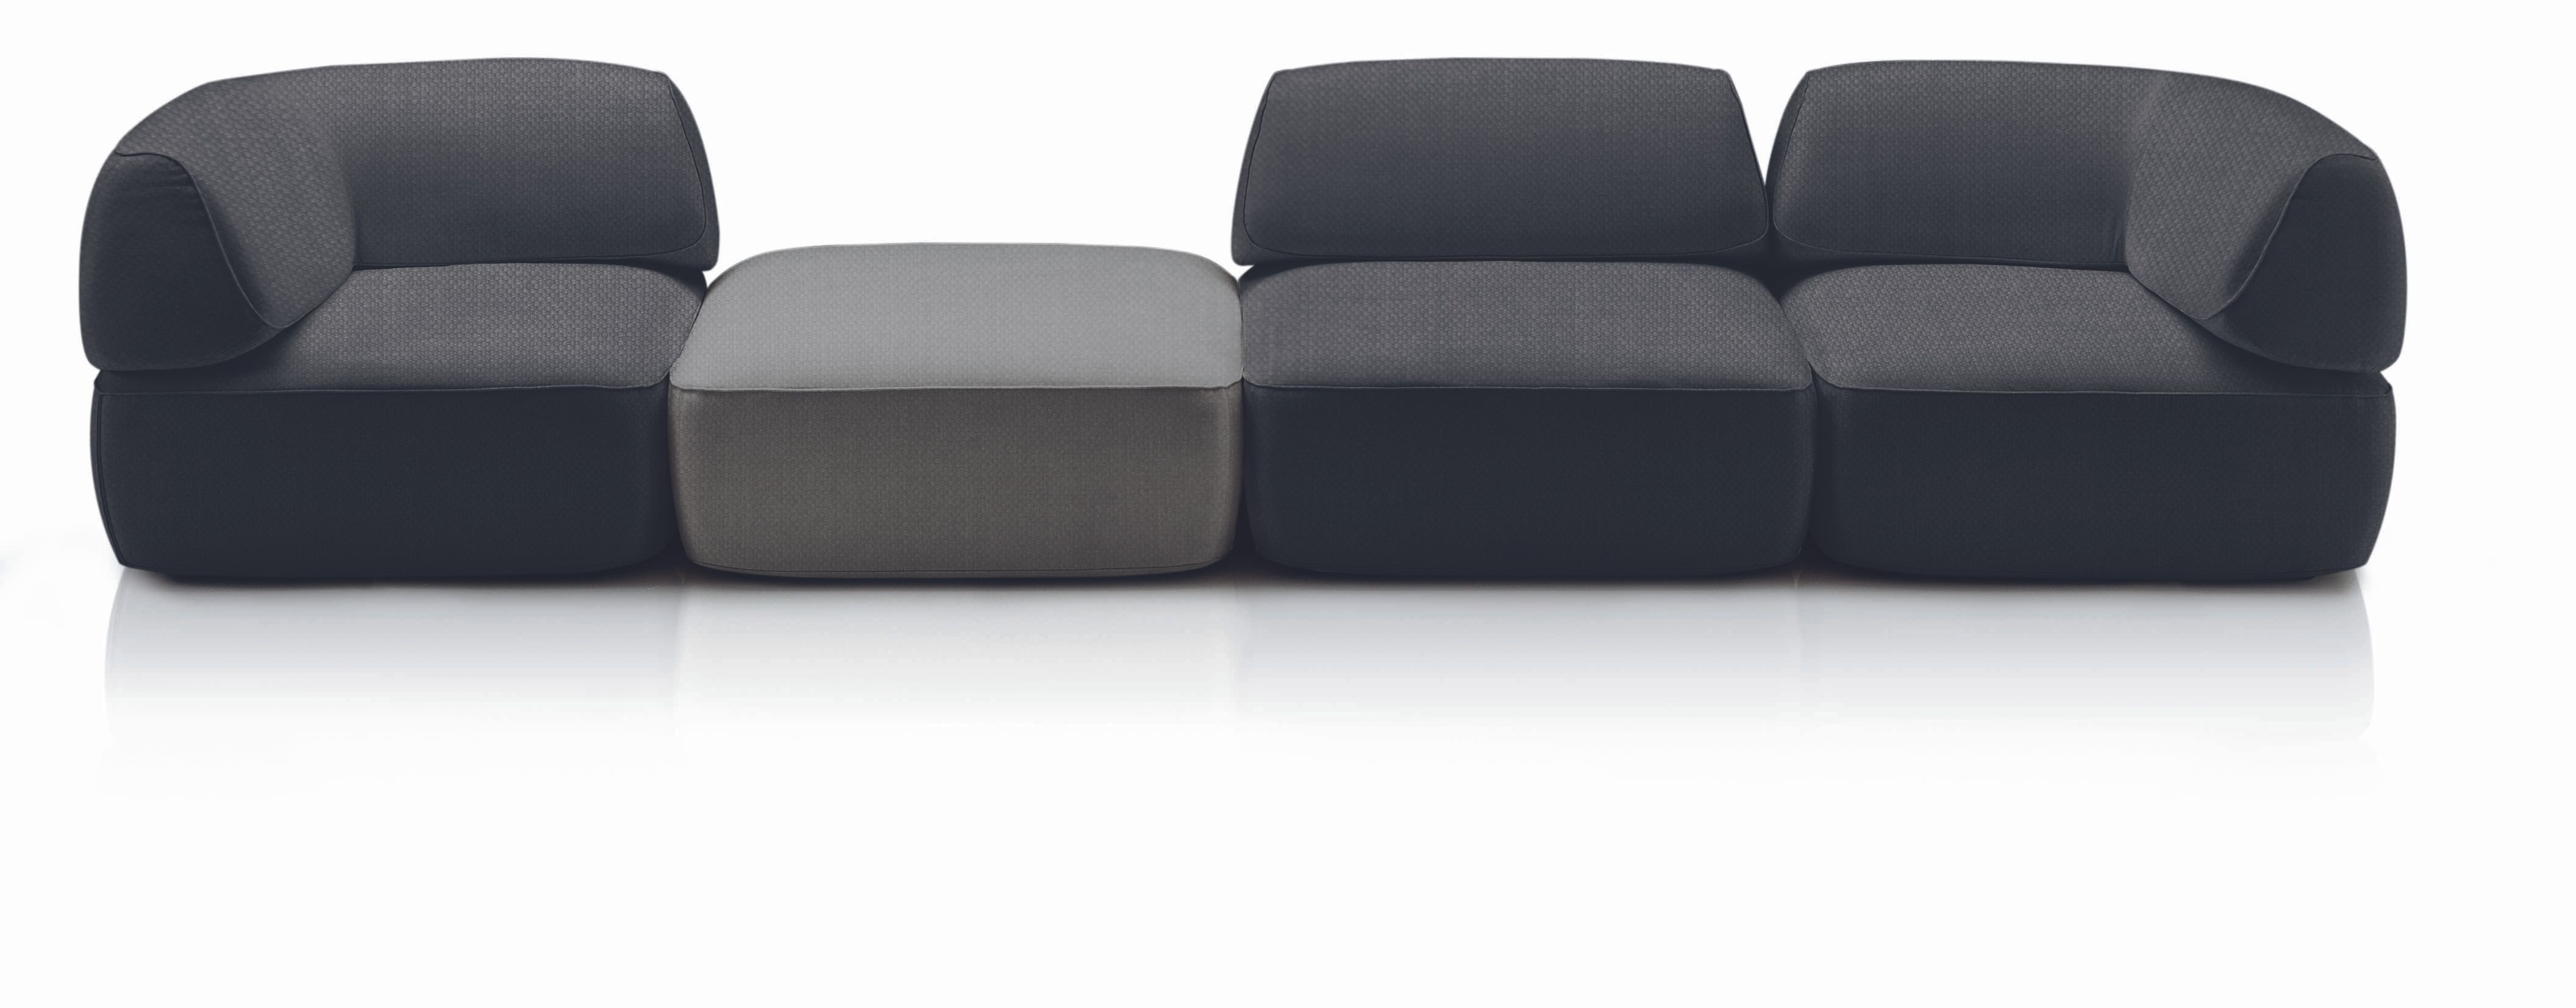 FAT TONY Project type: Sofa System, Couch, Armchair, Chaise Longue     Time:  2012-2013     Status: Available     Client: IP Design     Info: http://www.ipdesign.de     Photos: ipdesign   Furniture endlessly variable in use, in covers, in formation…     Fat Tony is a modular seating system whose ‘kit of parts’ allows a huge spectrum of variation possibilities. Designed by the architecture brand GRAFT, Fat Tony is endlessly flexible in use with its three cubic modules. Bachelor pad or loft, living room or hotel lobby – Fat Tony is at home anywhere. Its different elements make it uniquely versatile and make it look great in any location.   